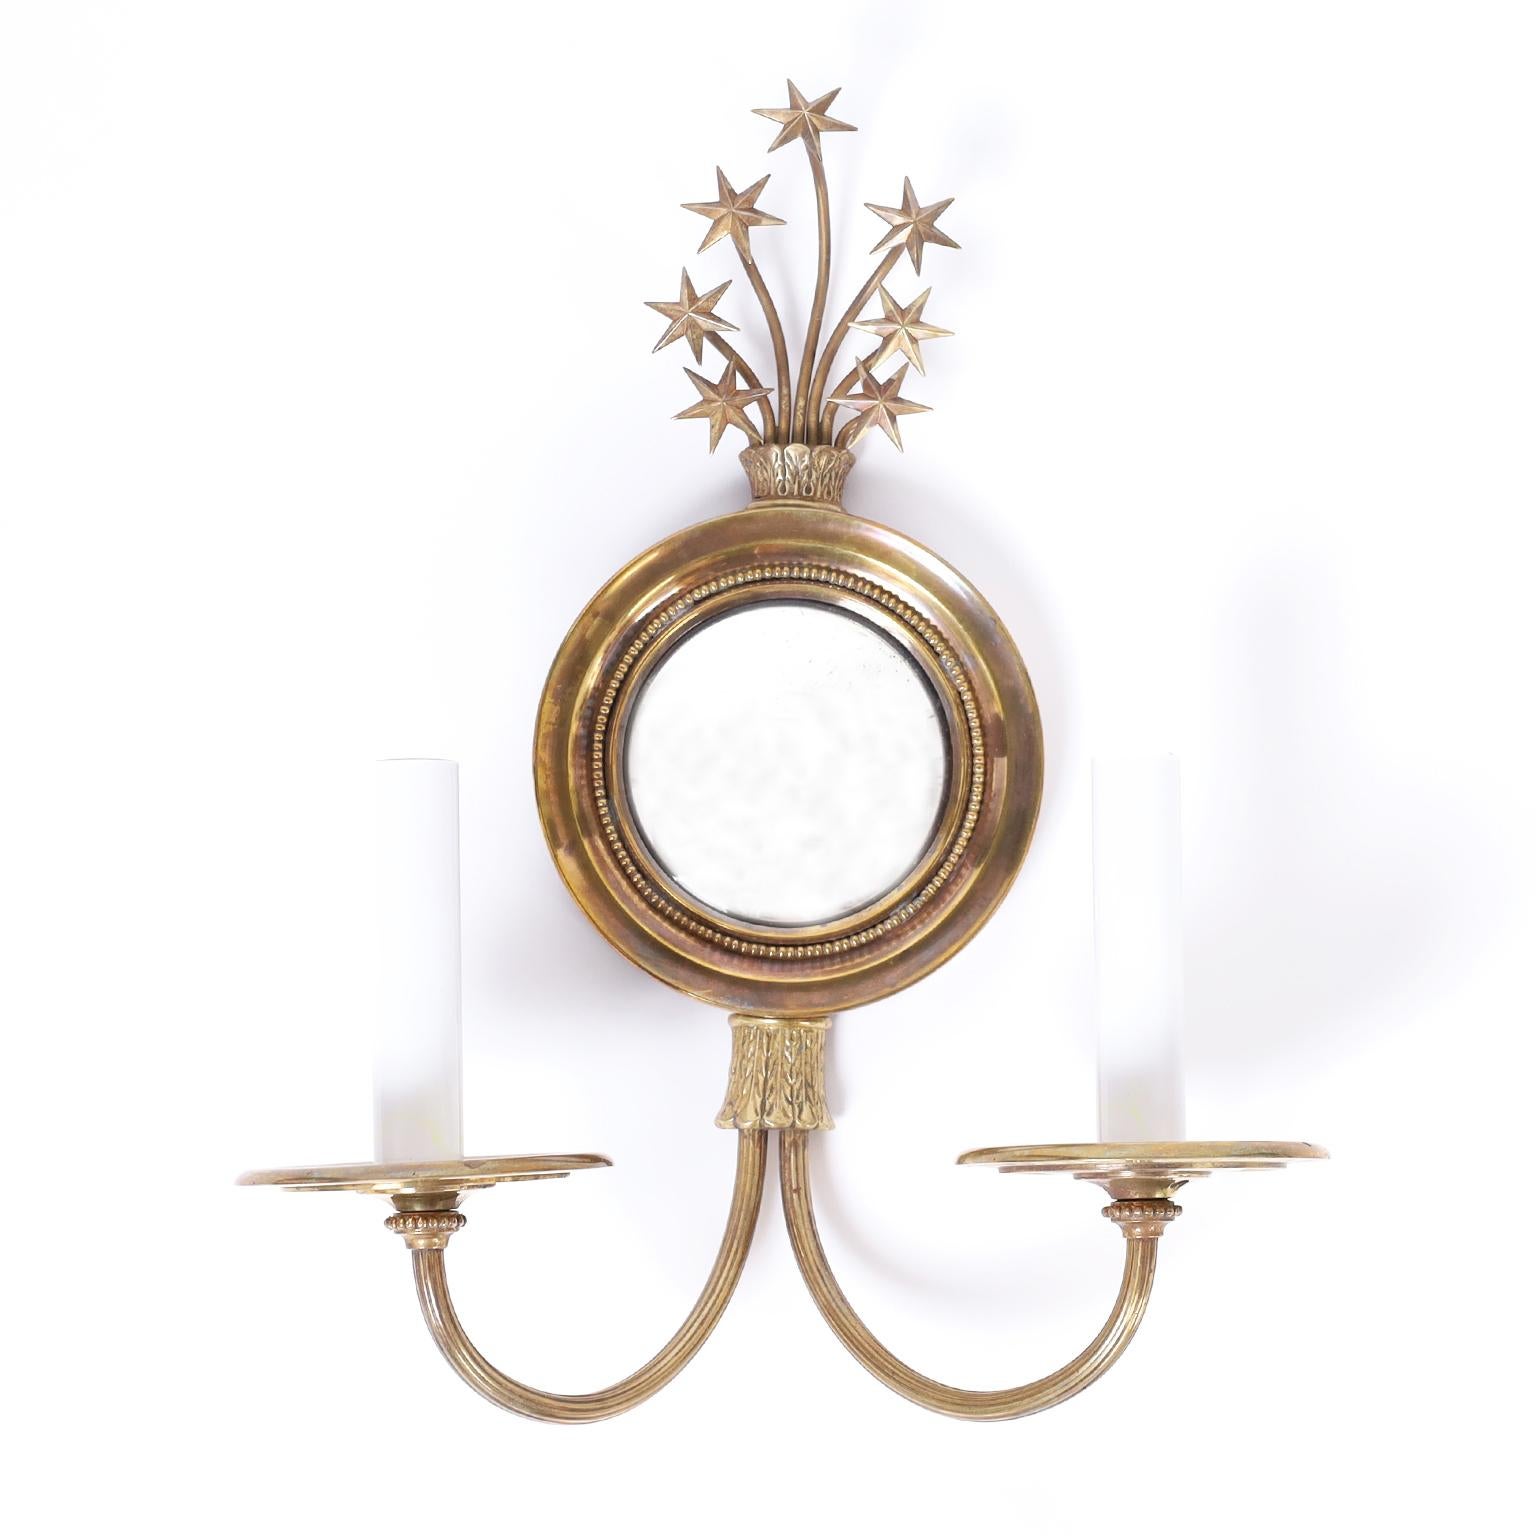 American Pair of Brass & Mirrored Wall Sconces with Stars